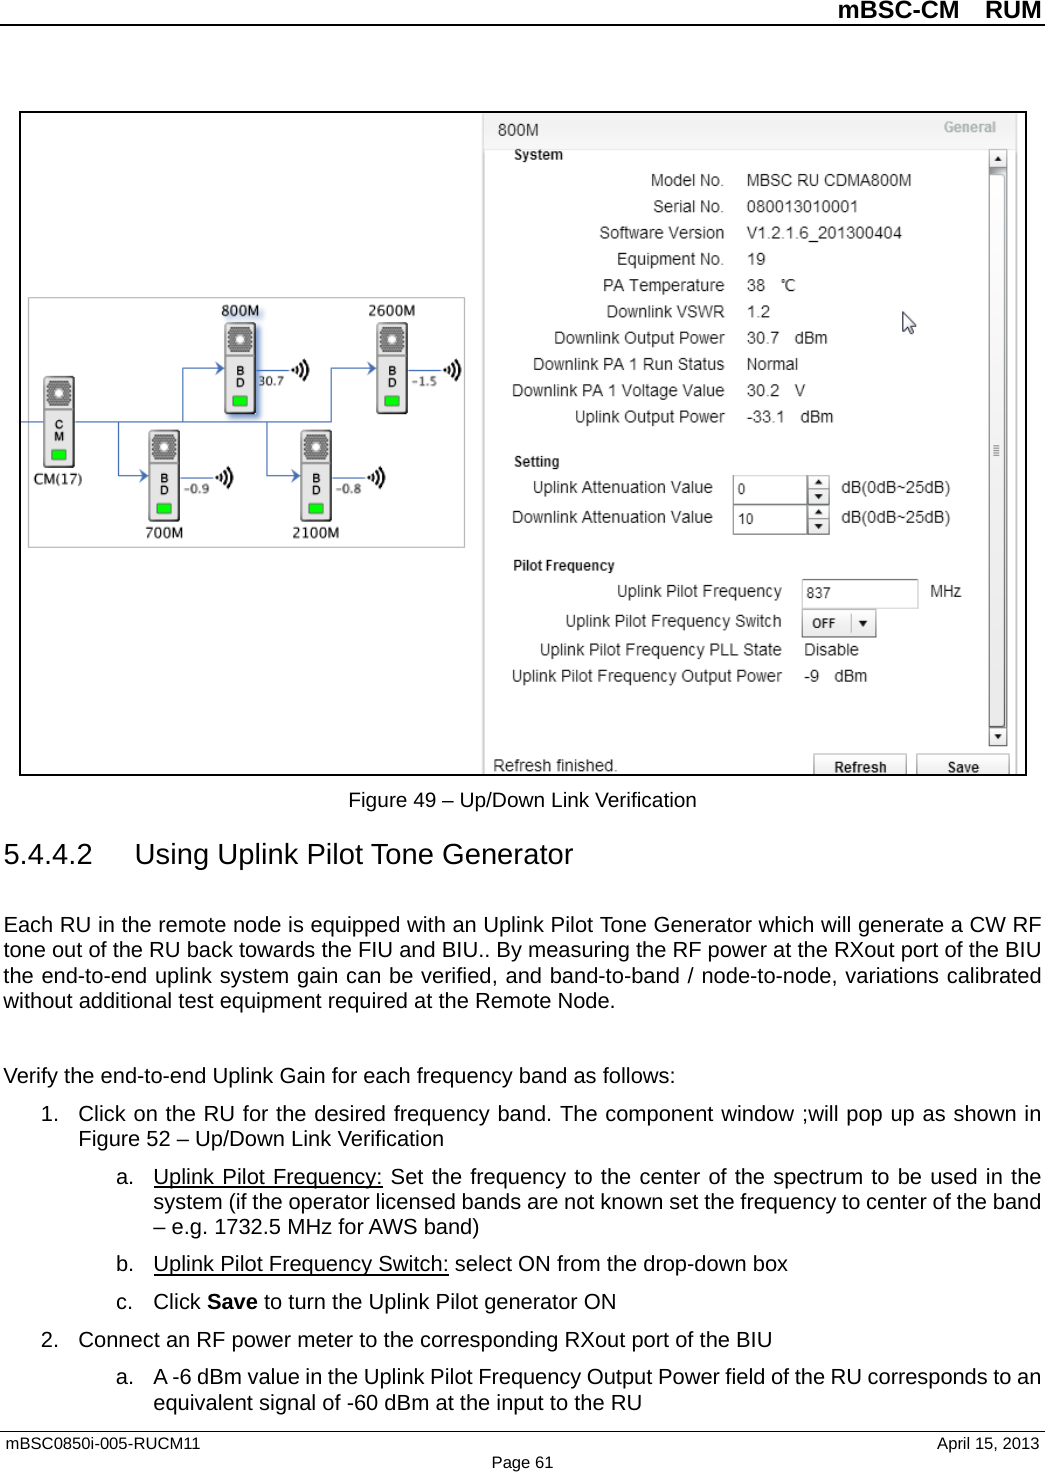          mBSC-CM  RUM   mBSC0850i-005-RUCM11                                 April 15, 2013 Page 61  Figure 49 – Up/Down Link Verification 5.4.4.2 Using Uplink Pilot Tone Generator Each RU in the remote node is equipped with an Uplink Pilot Tone Generator which will generate a CW RF tone out of the RU back towards the FIU and BIU.. By measuring the RF power at the RXout port of the BIU the end-to-end uplink system gain can be verified, and band-to-band / node-to-node, variations calibrated without additional test equipment required at the Remote Node.  Verify the end-to-end Uplink Gain for each frequency band as follows: 1. Click on the RU for the desired frequency band. The component window ;will pop up as shown in Figure 52 – Up/Down Link Verification a. Uplink Pilot Frequency: Set the frequency to the center of the spectrum to be used in the system (if the operator licensed bands are not known set the frequency to center of the band – e.g. 1732.5 MHz for AWS band) b. Uplink Pilot Frequency Switch: select ON from the drop-down box c. Click Save to turn the Uplink Pilot generator ON 2. Connect an RF power meter to the corresponding RXout port of the BIU a. A -6 dBm value in the Uplink Pilot Frequency Output Power field of the RU corresponds to an equivalent signal of -60 dBm at the input to the RU 